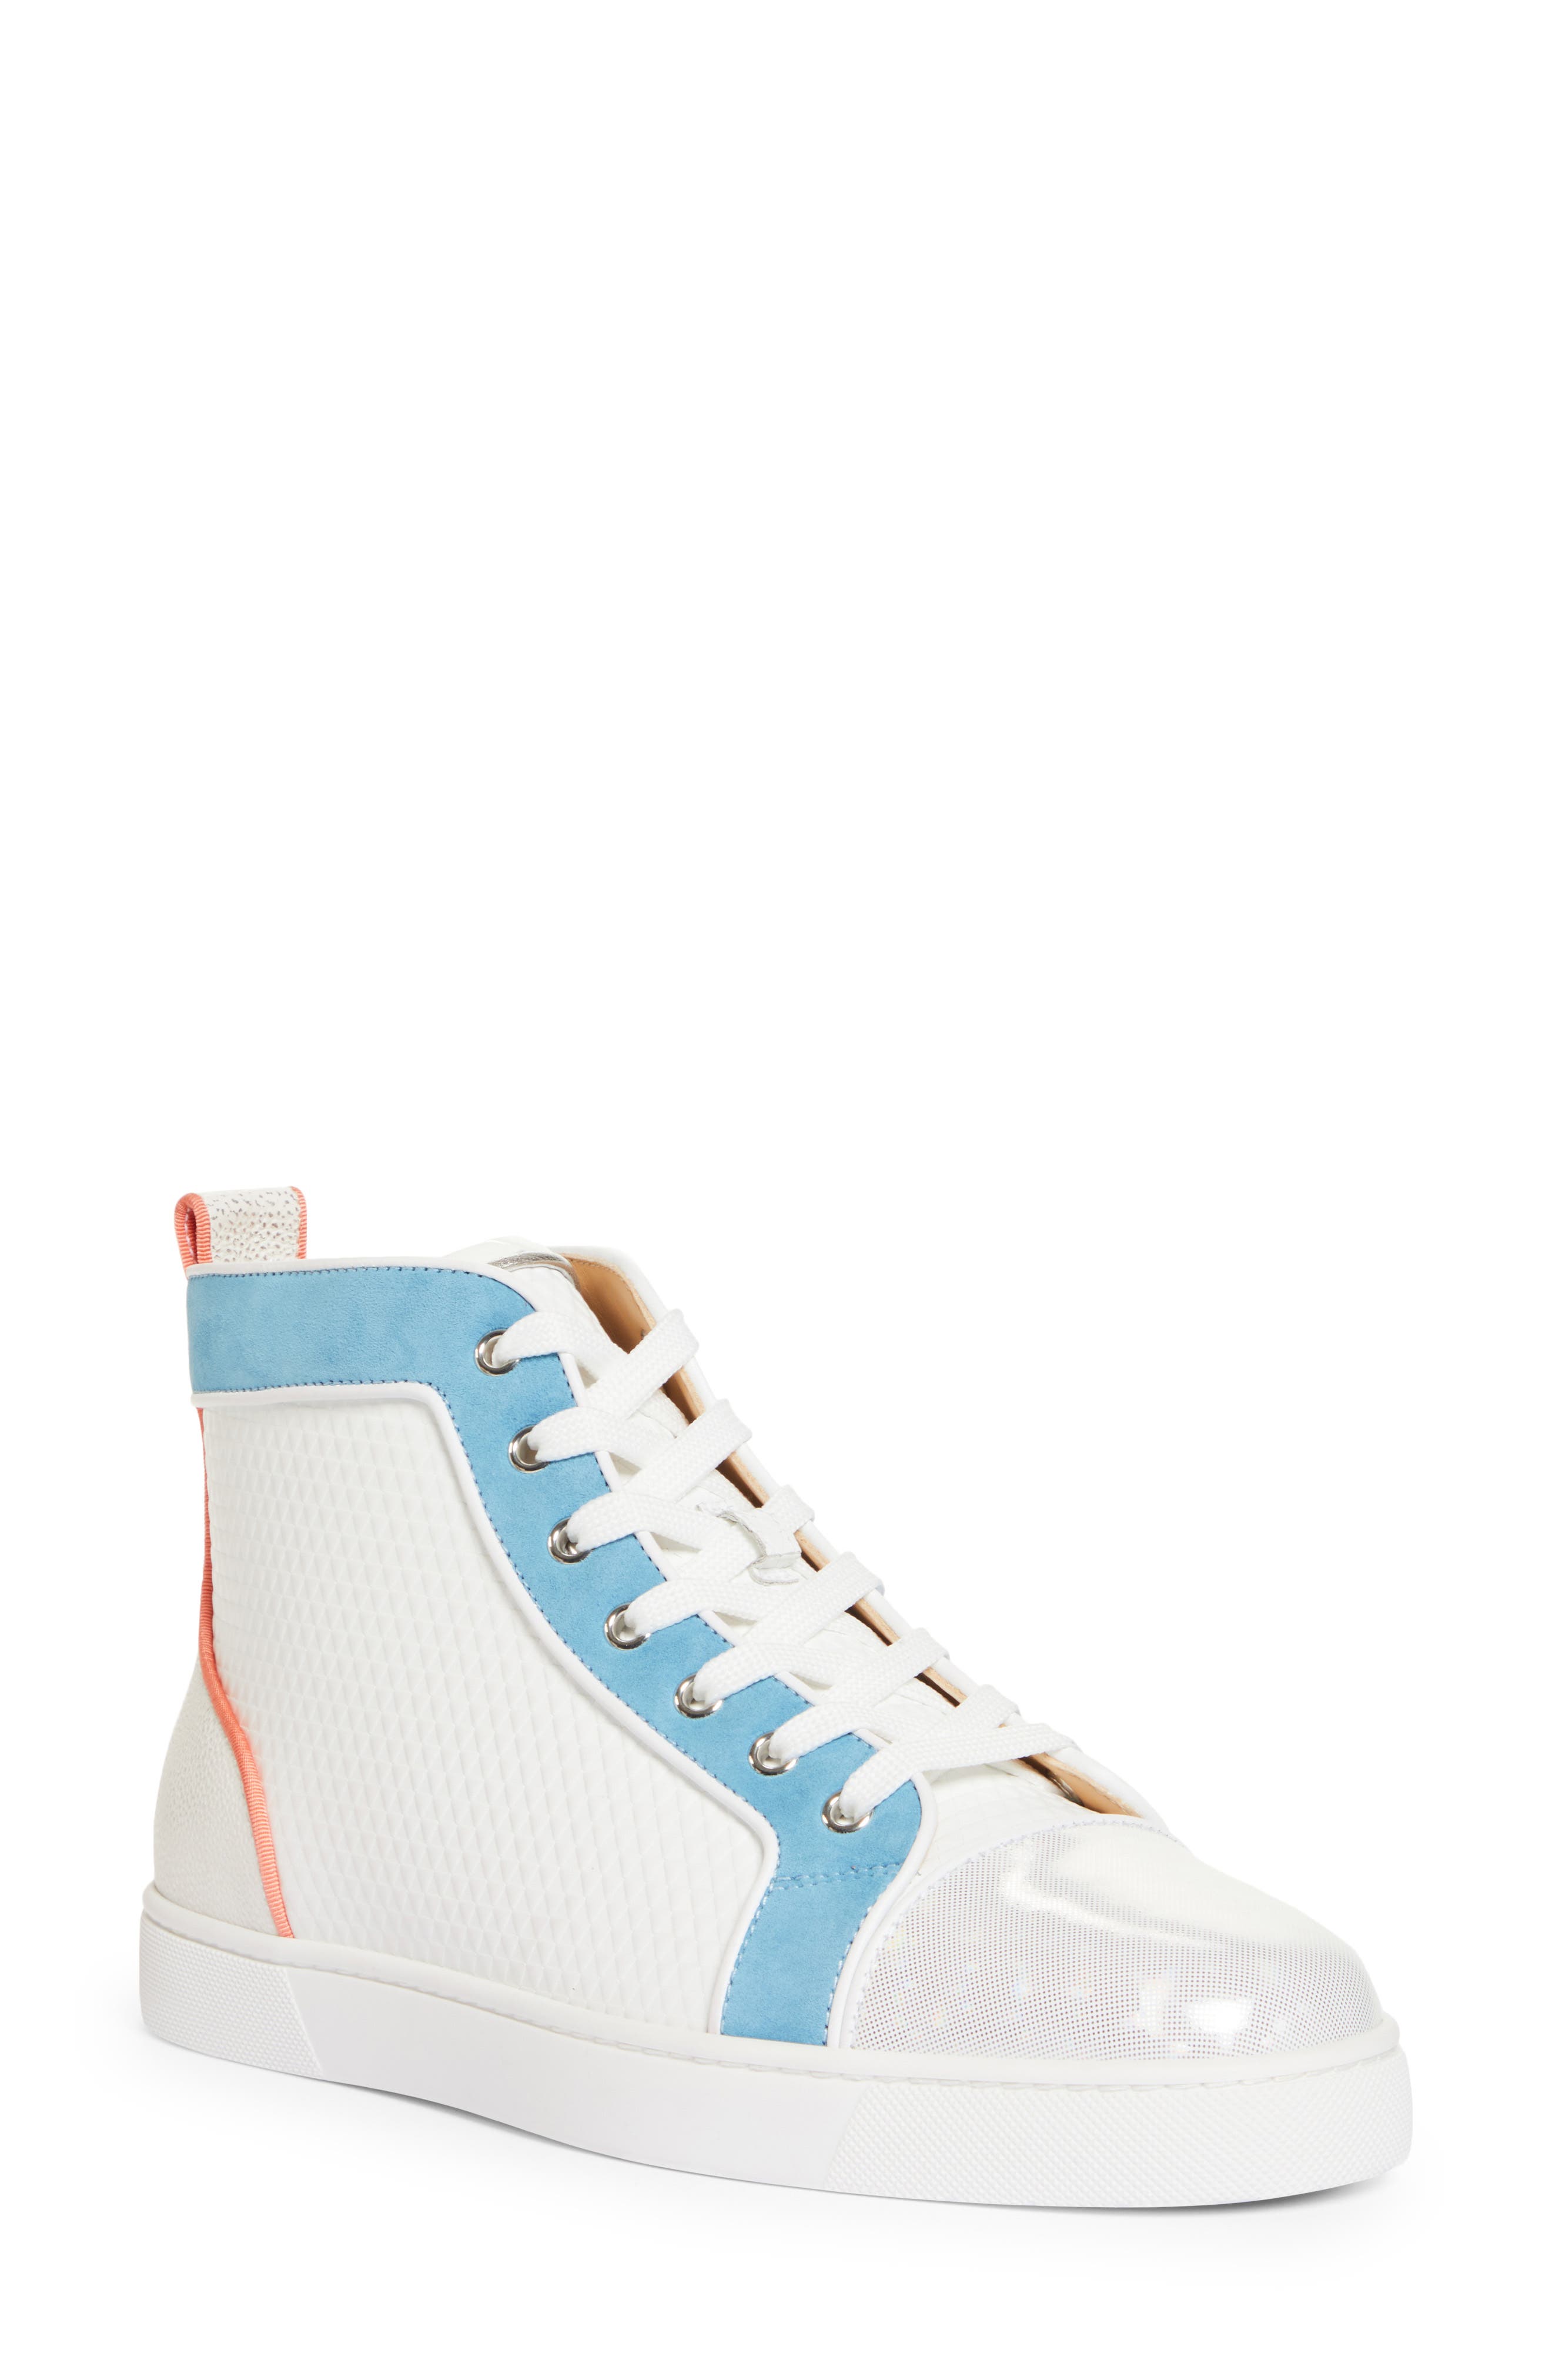 Christian Louboutin Louis Orlato High Top Sneaker in Bianco/Panorama at Nordstrom, Size 10Us